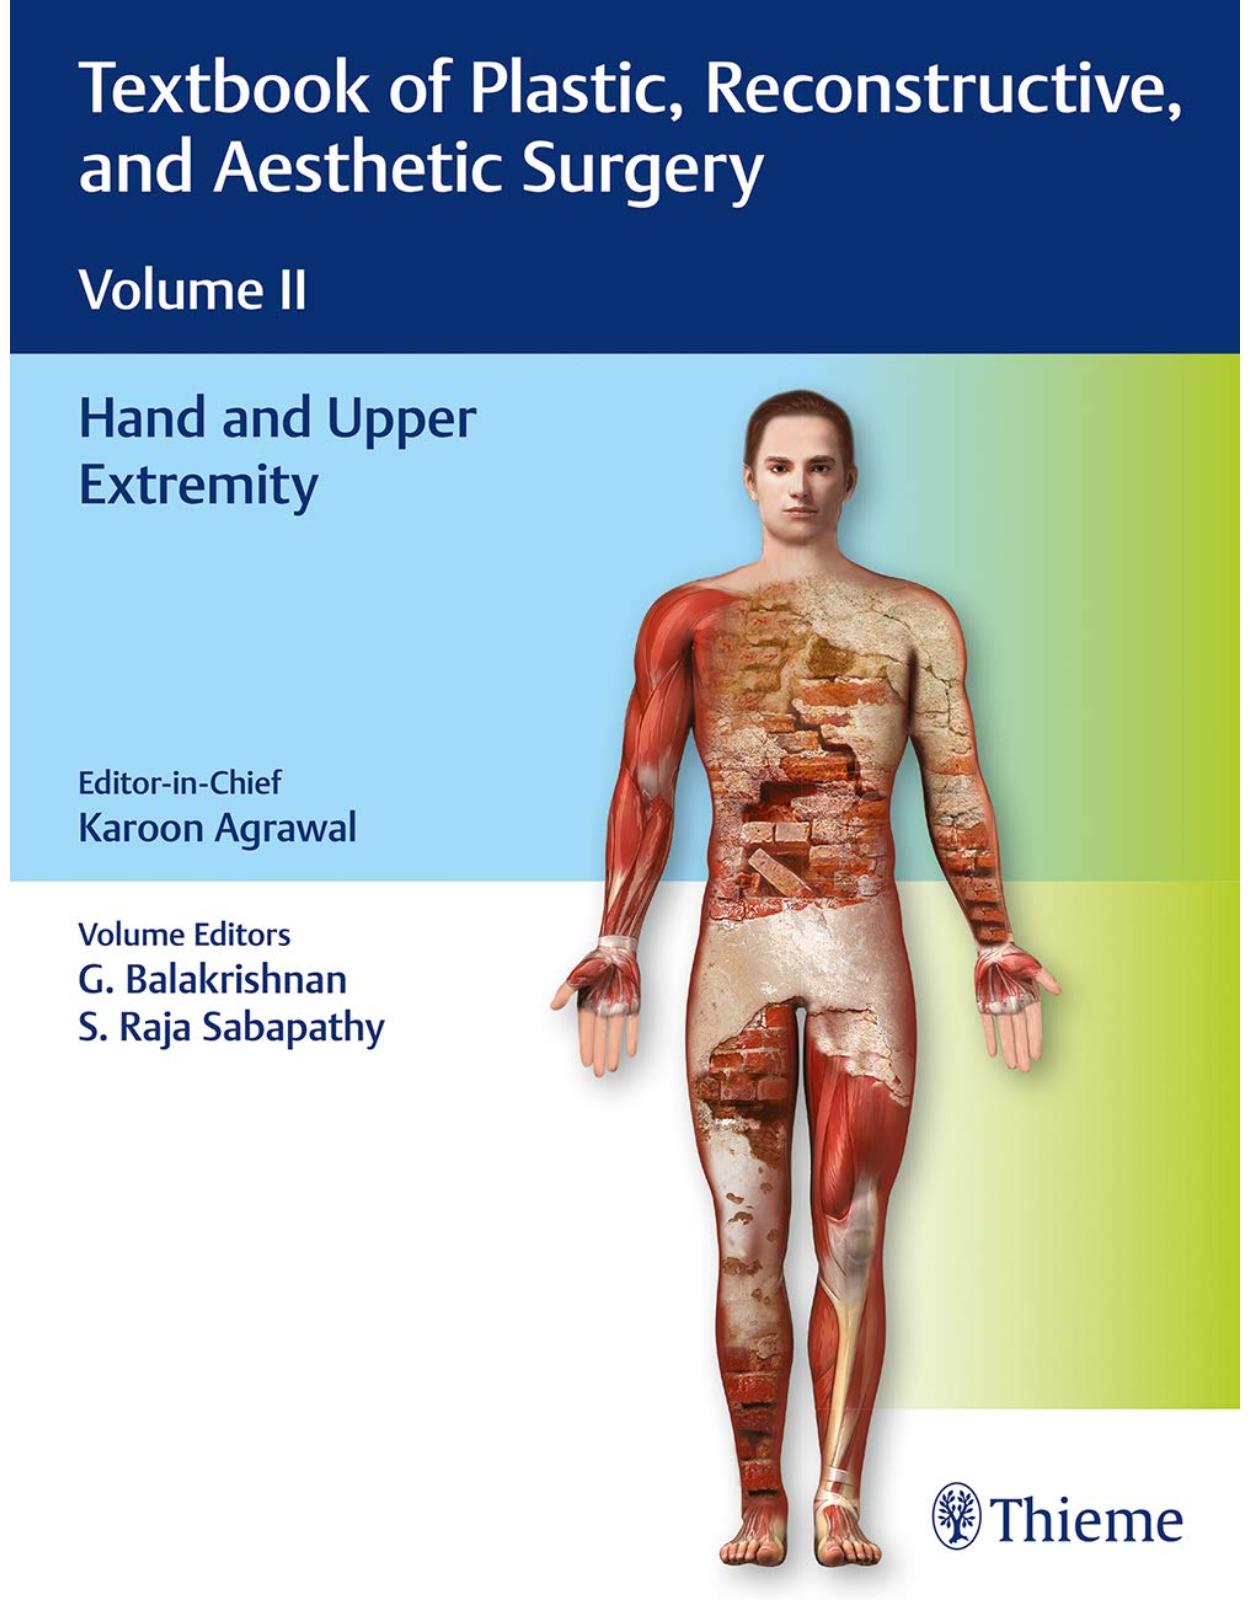 Textbook of Plastic, Reconstructive and Aesthetic Surgery (Vol. 2): Hand and Upper Extremity 